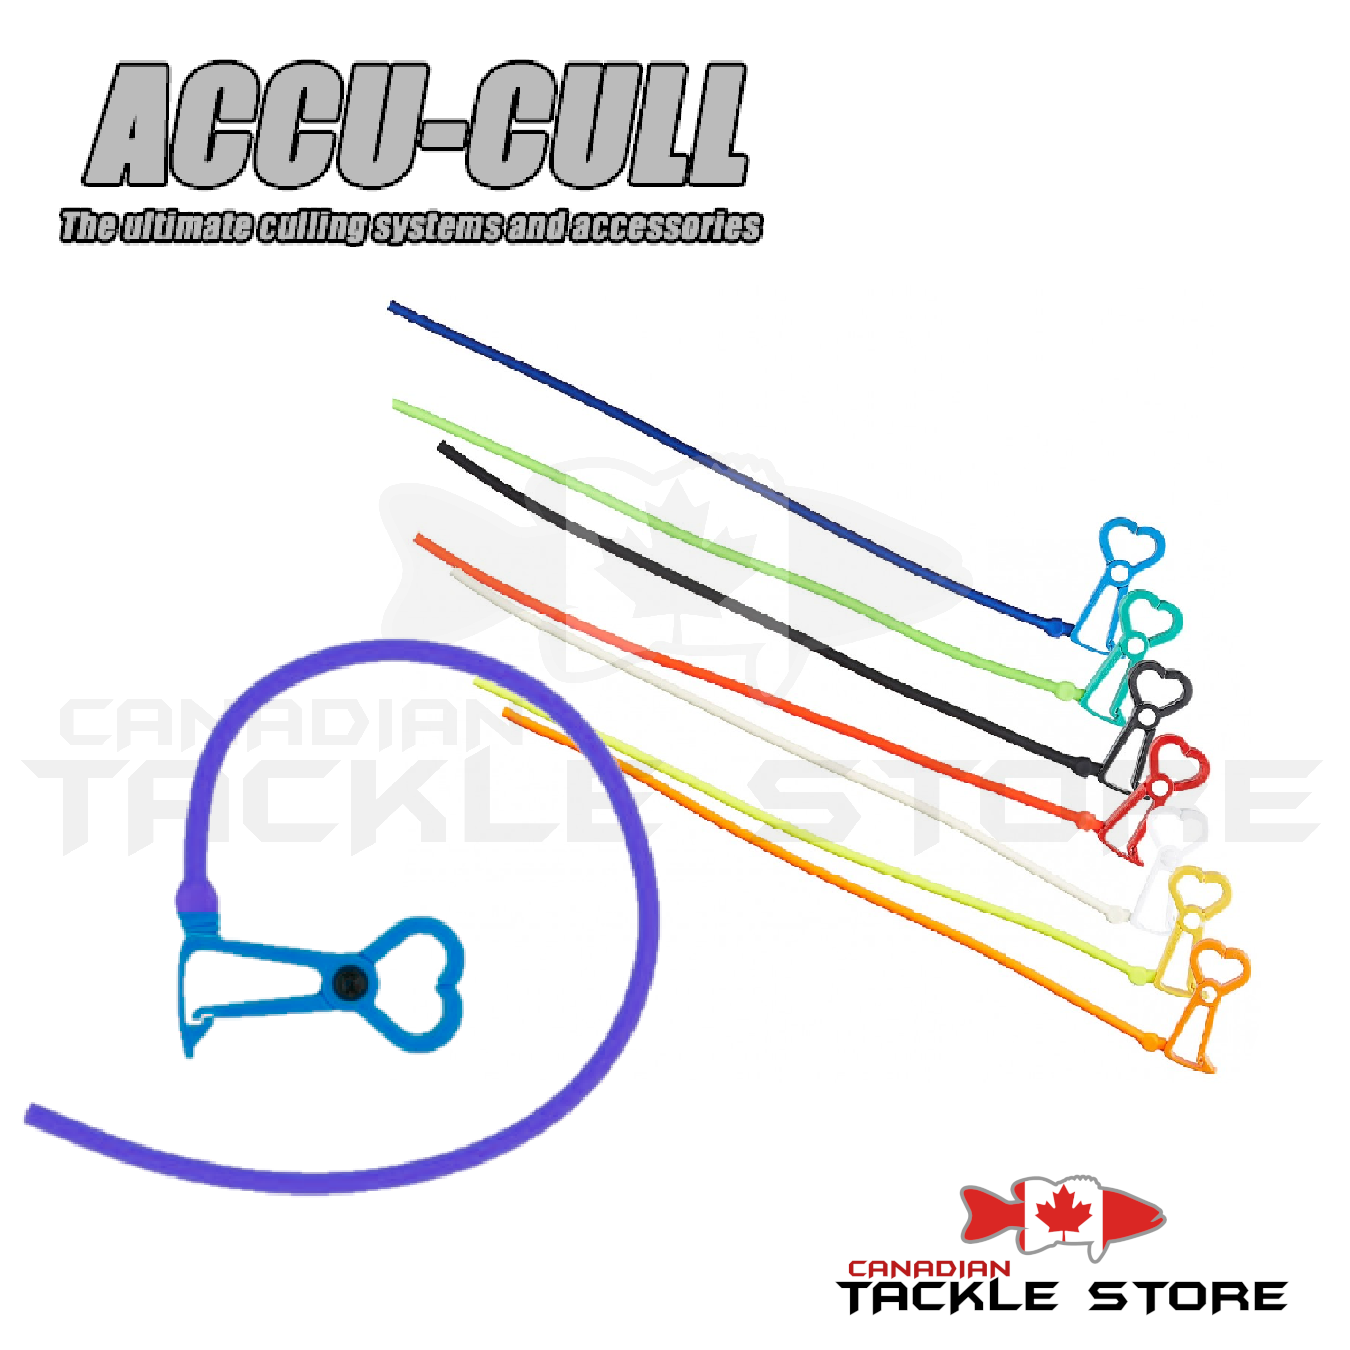 Accu-cull Culling System Tournament Weight Recorder W/mounting